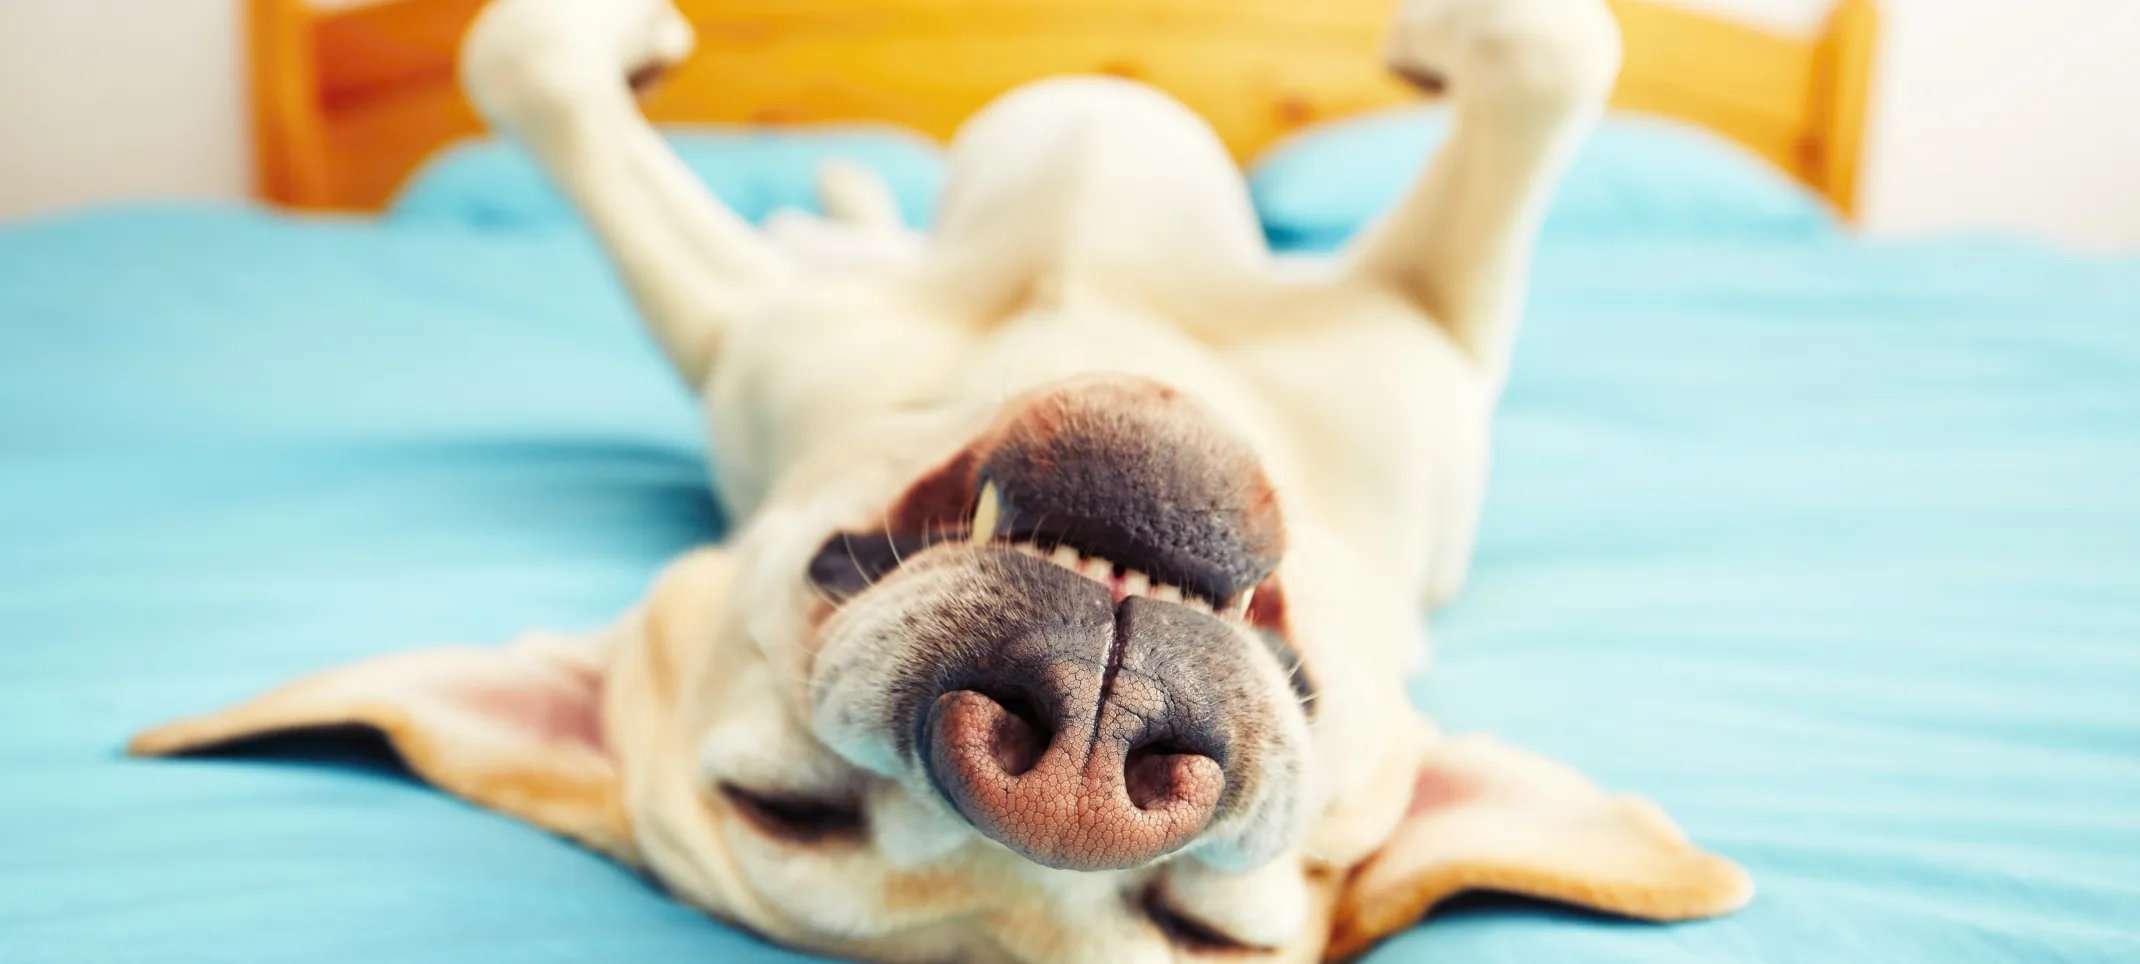 Dog lying upside down on bed